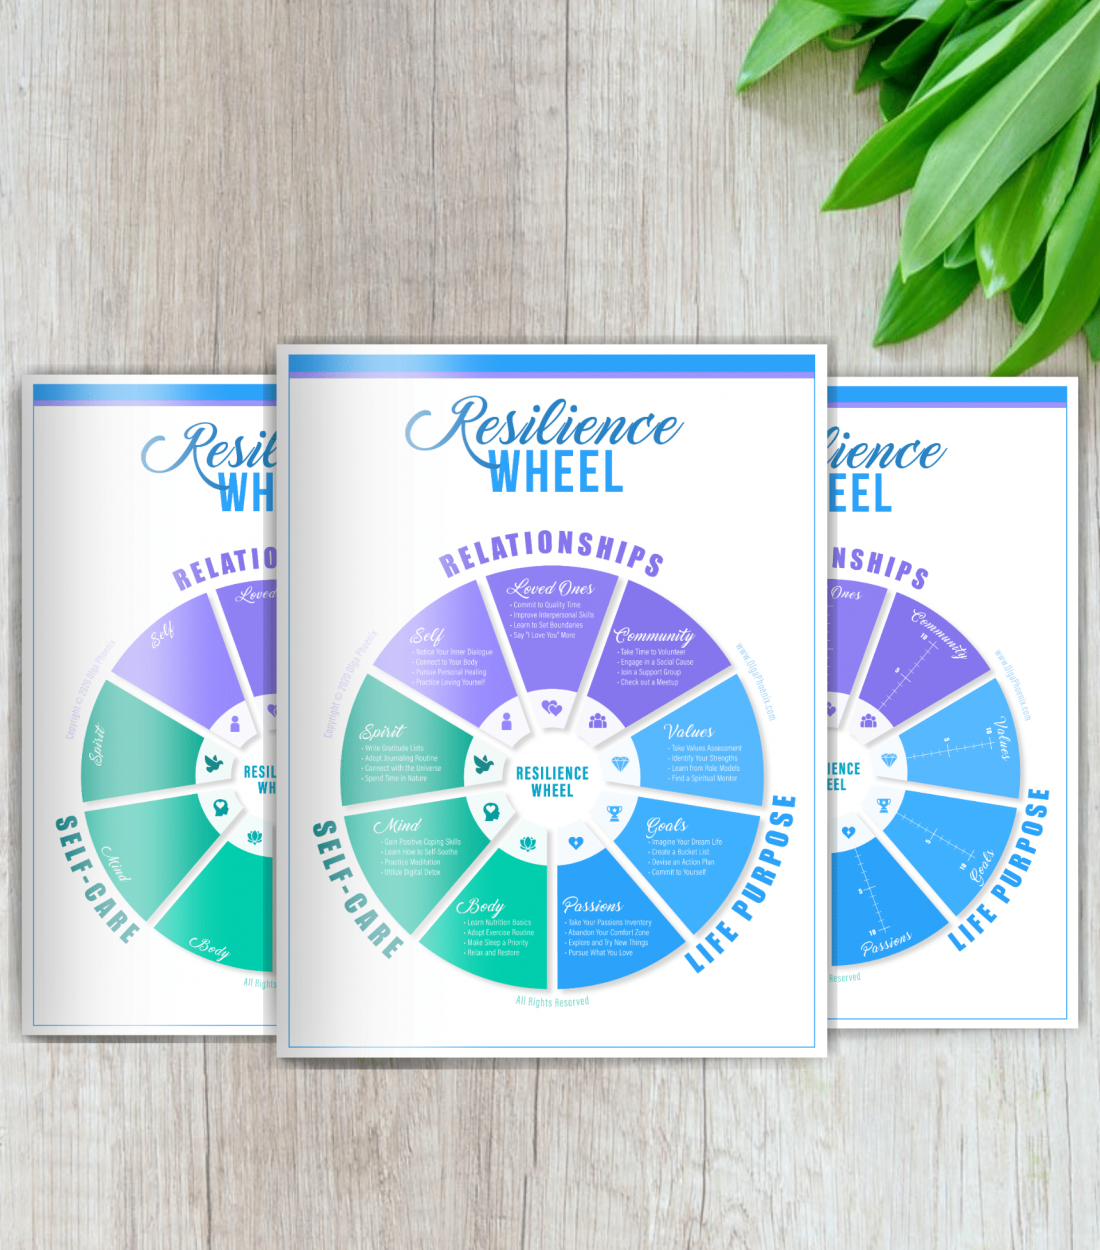 The Resilience Wheel, the Resilience Wheel Assessment, and the Create-Your-Own Resilience Wheel